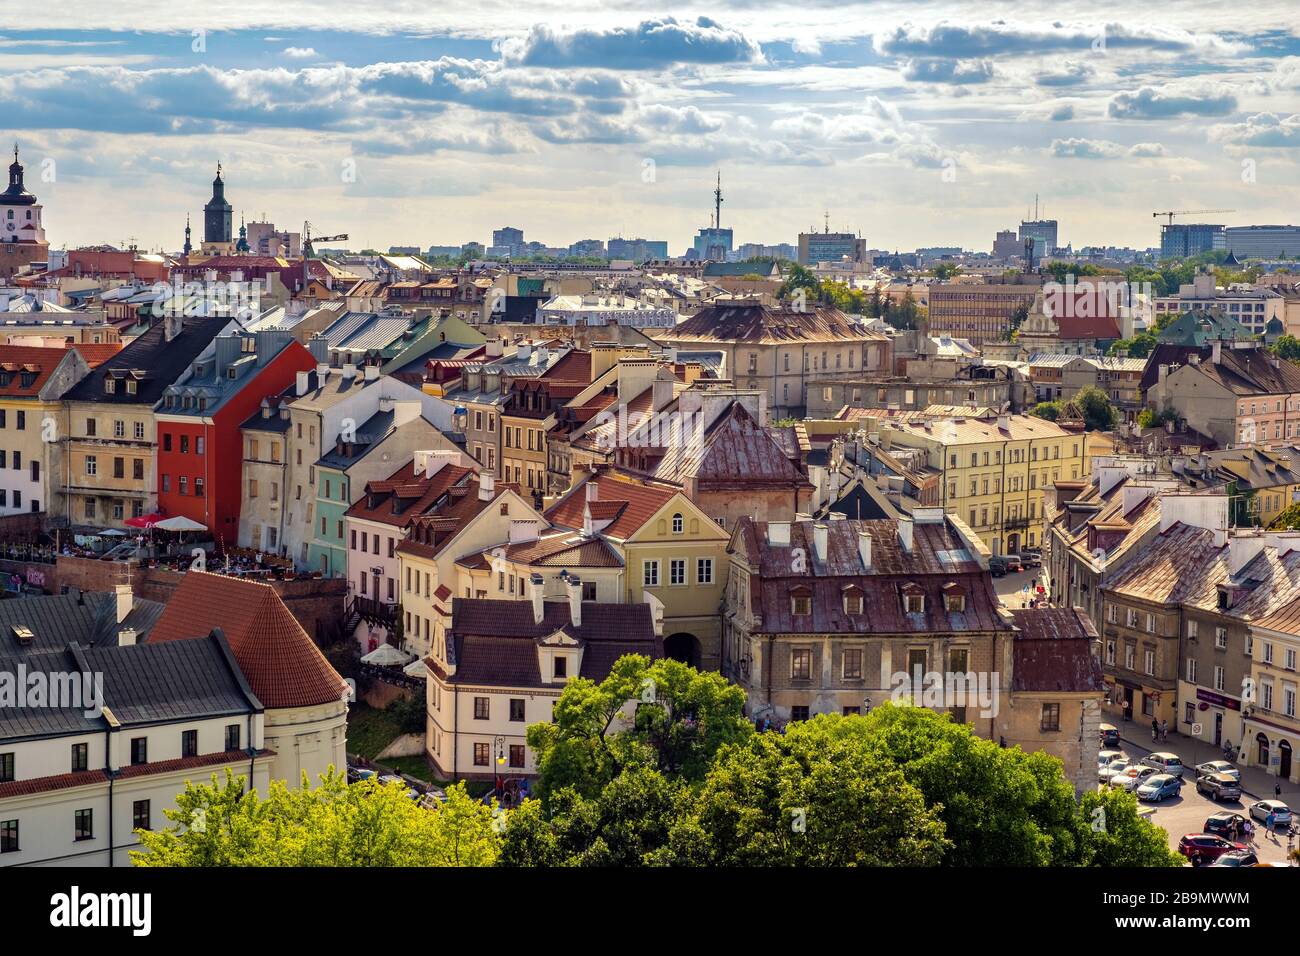 Lublin, Lubelskie / Poland - 2019/08/18: Panoramic view of city center with St. Stanislav Basilica and Trinitarian Tower in historic old town quarter Stock Photo